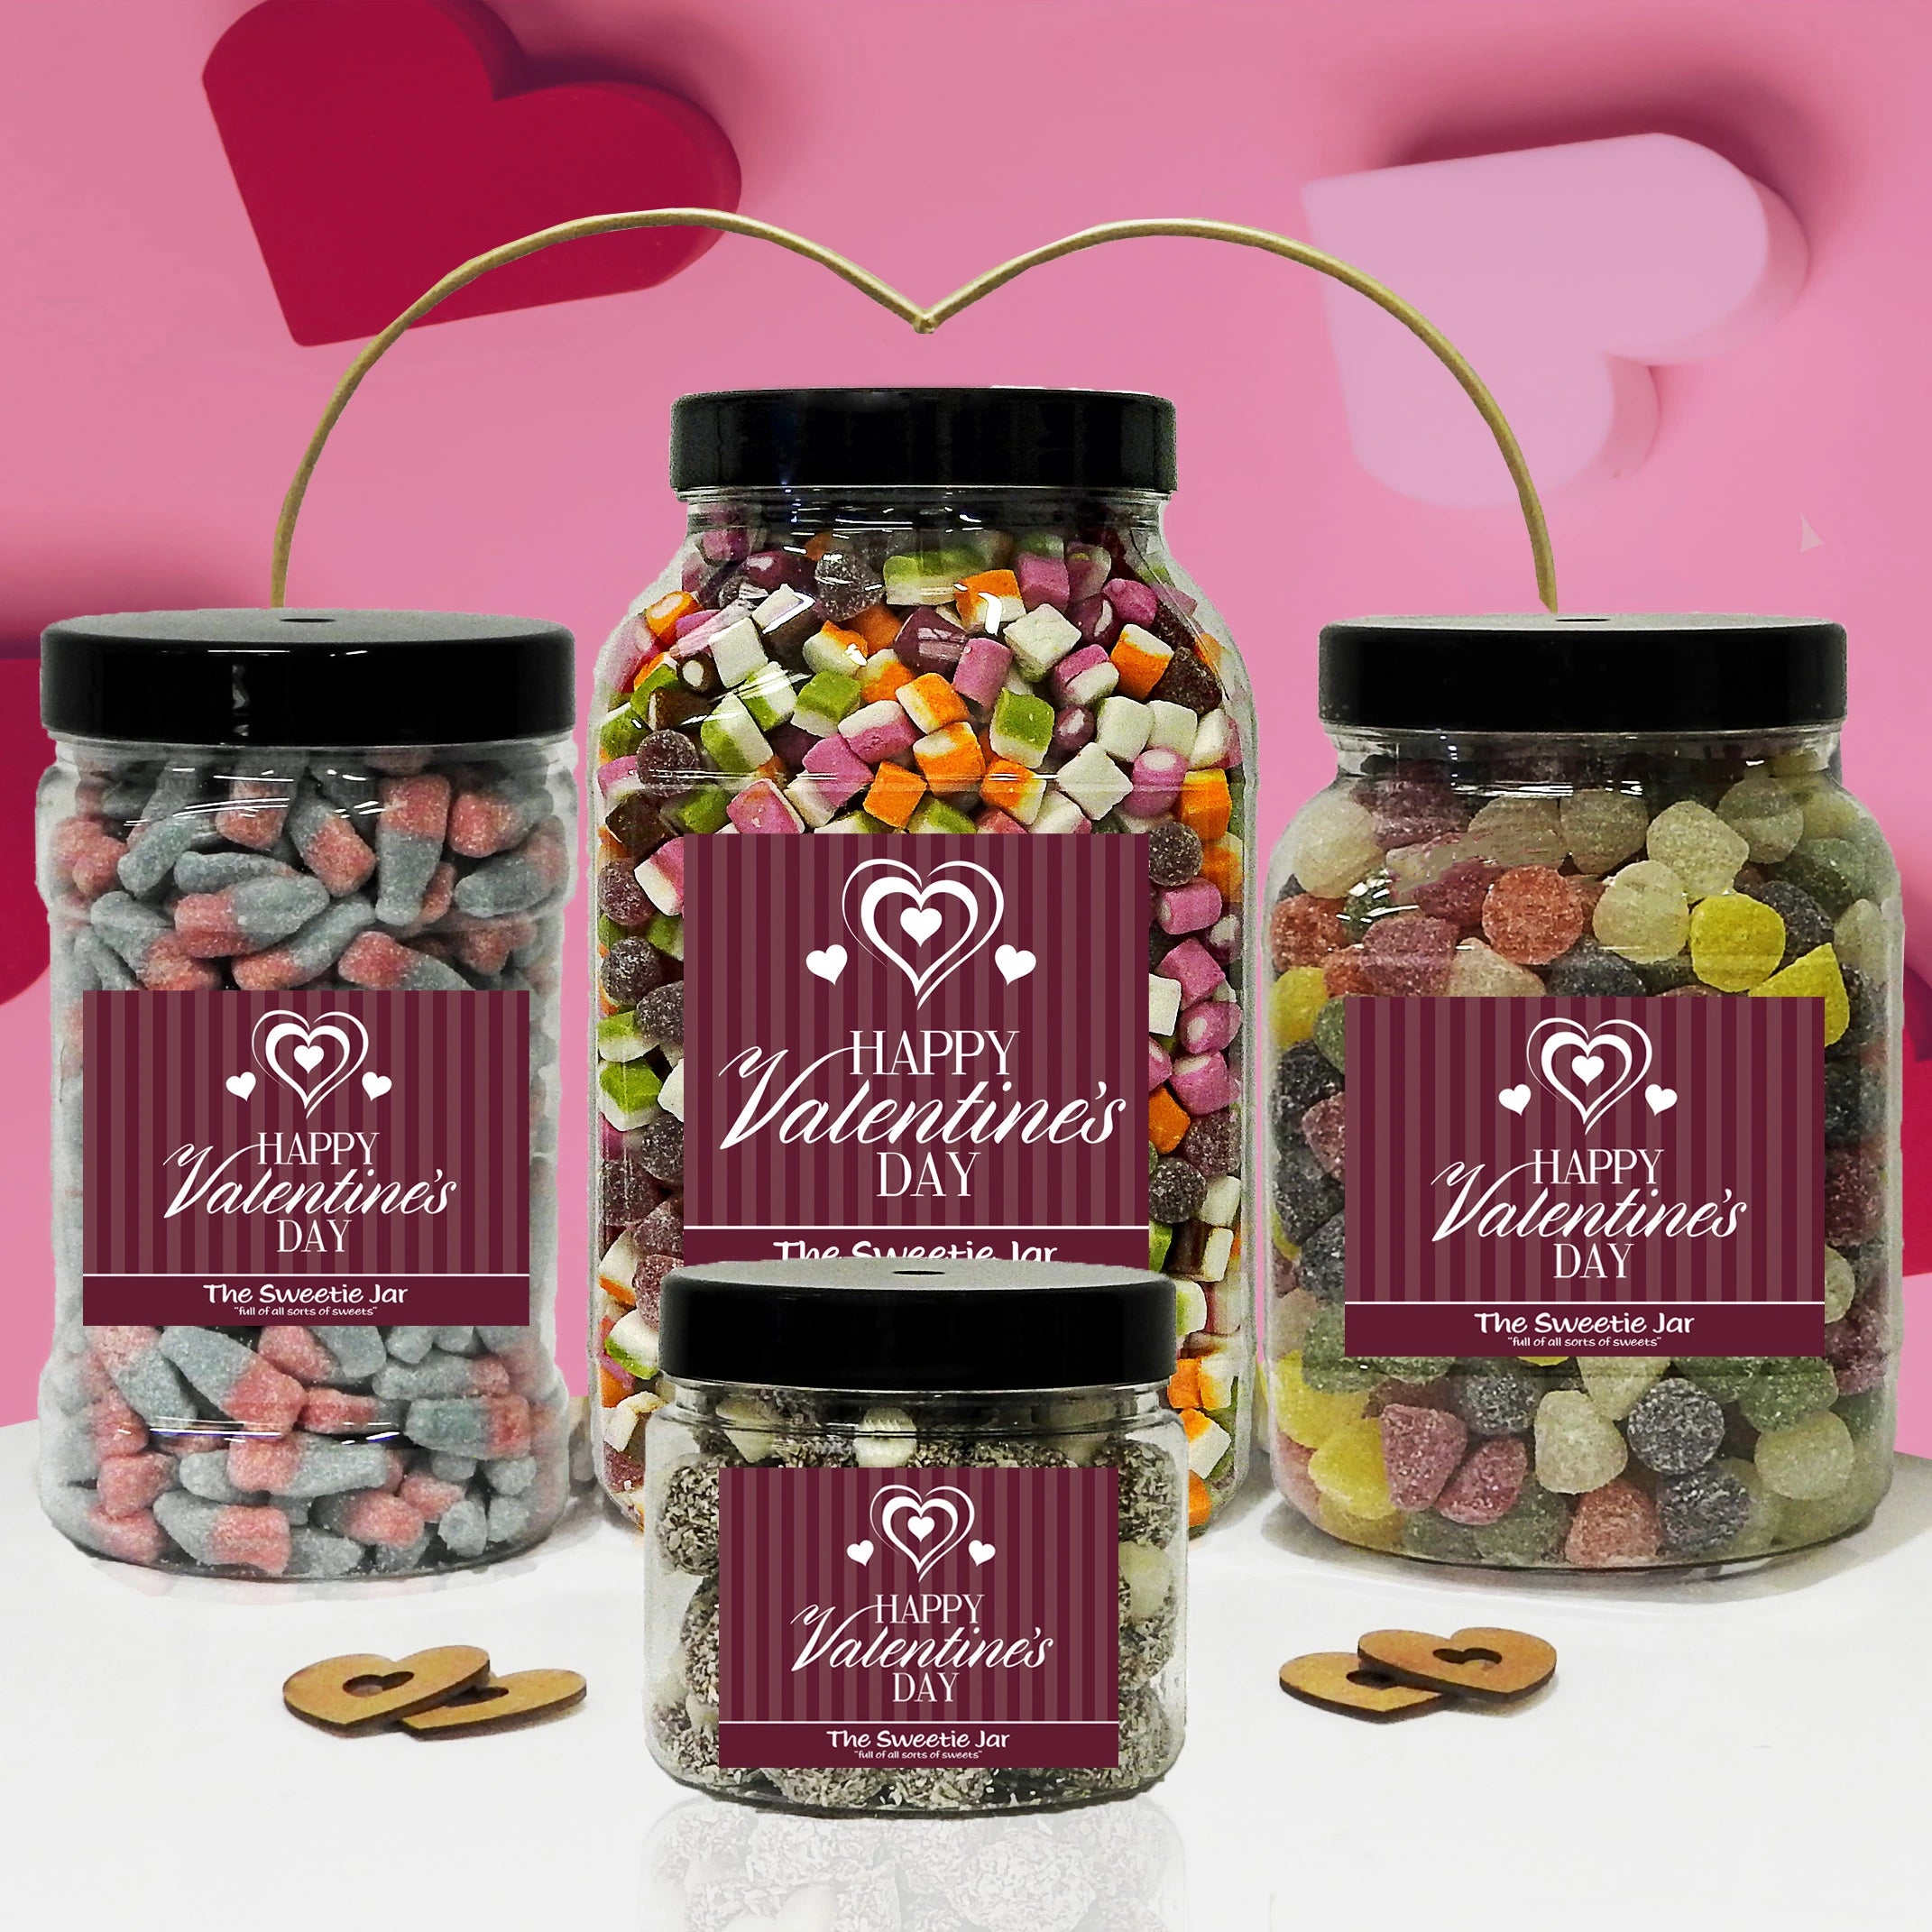 Jars of Retro Sweets for Valentines Day